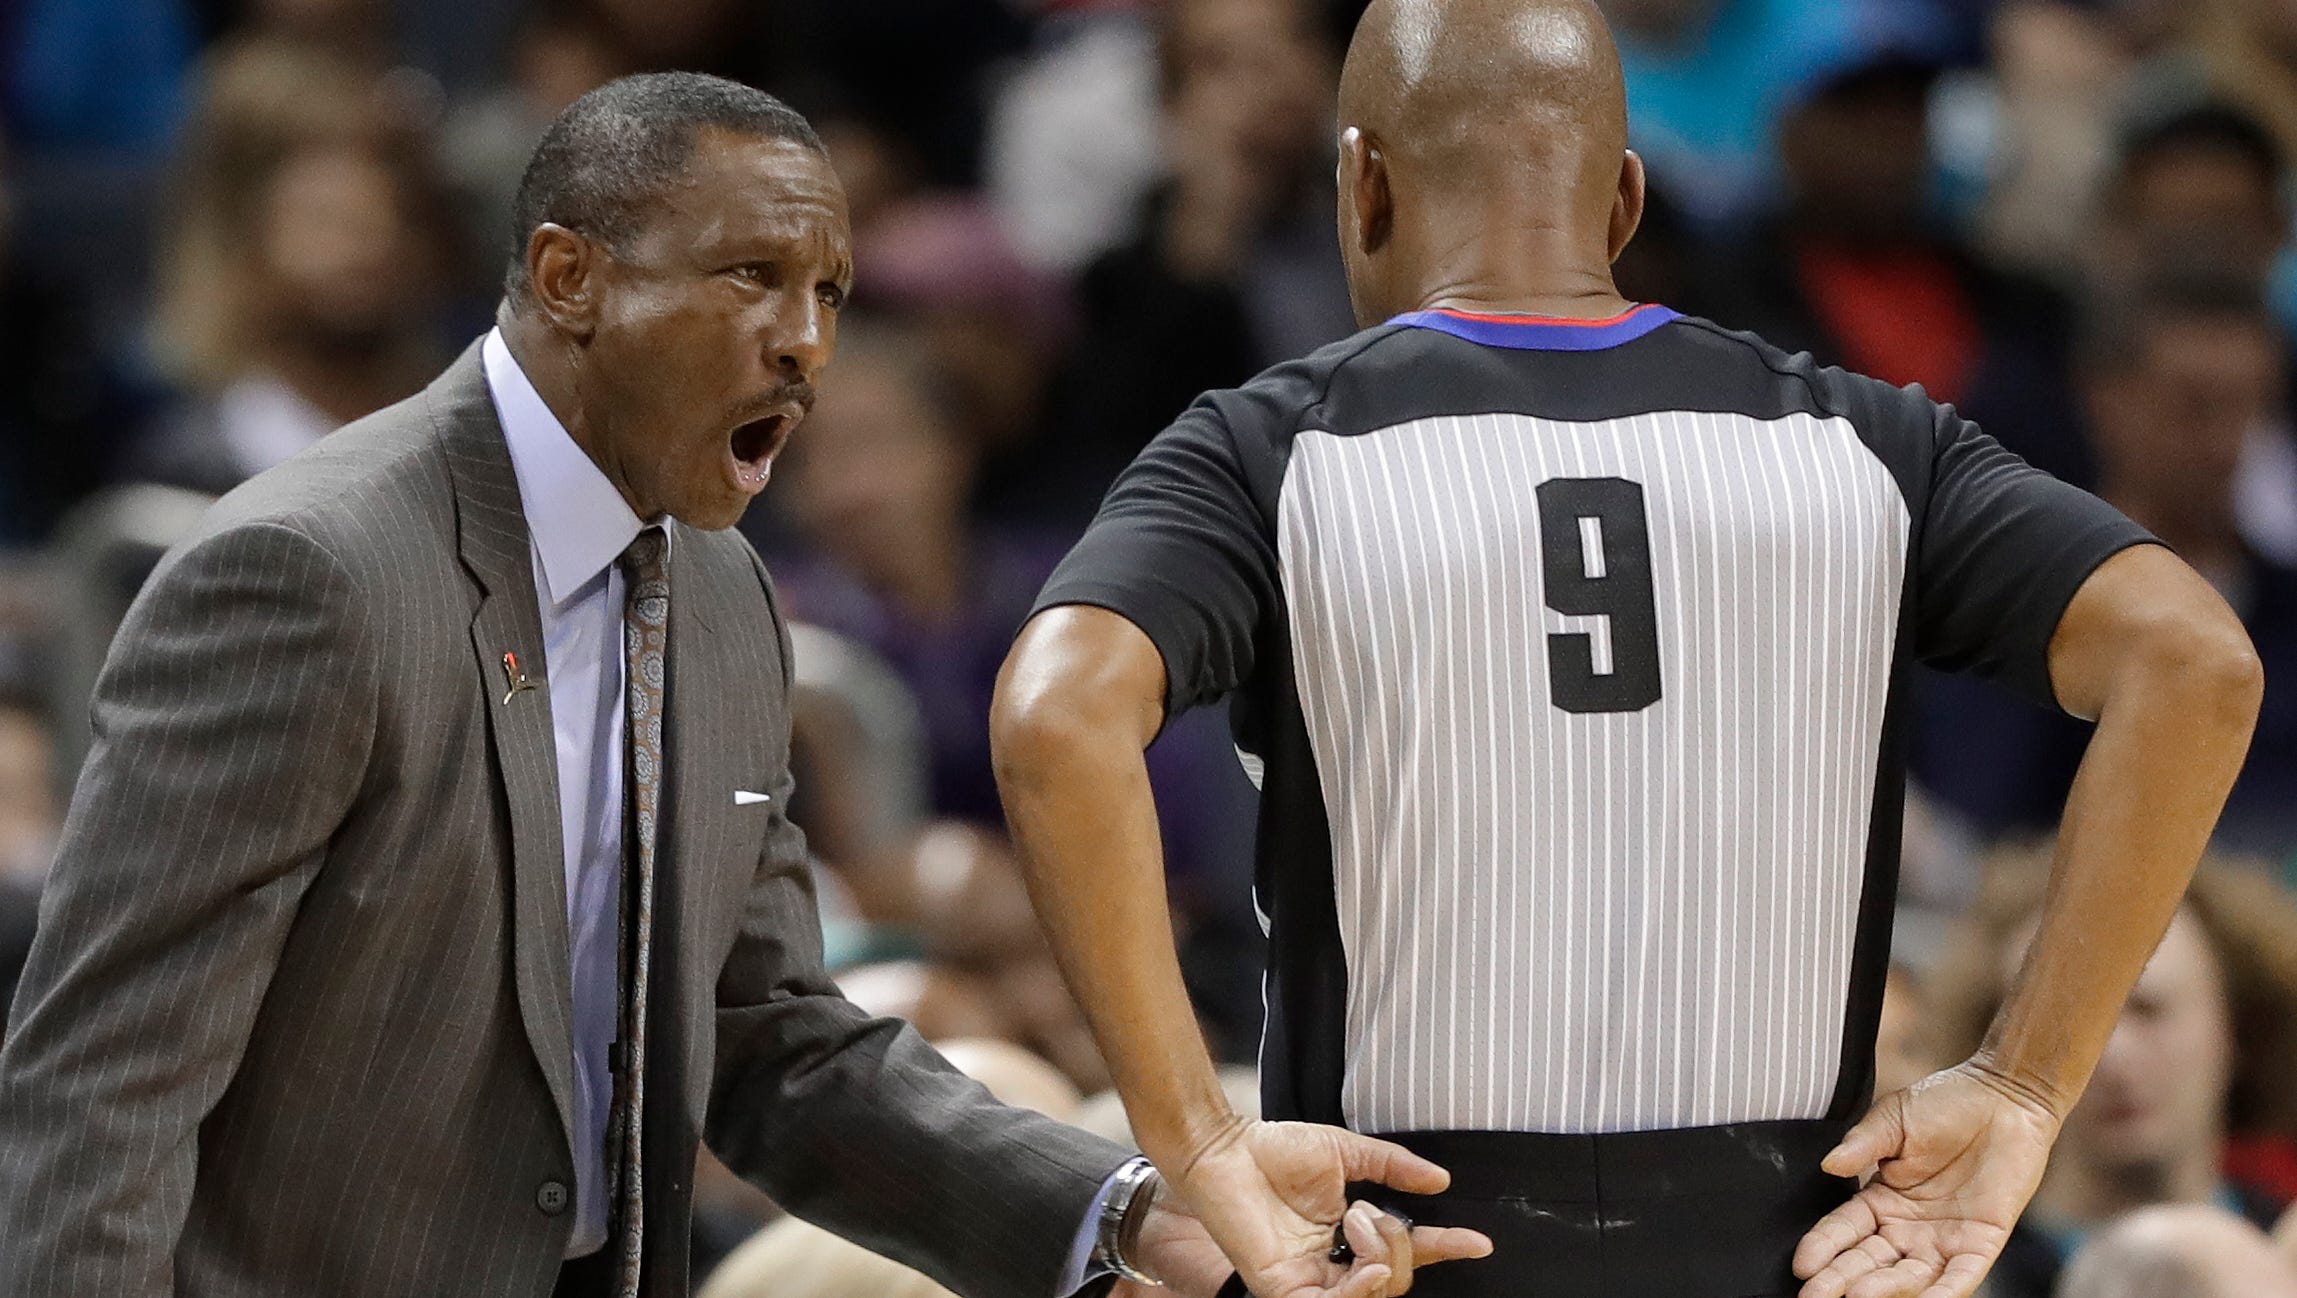 Toronto Raptors coach Dwane Casey, left, argues a call during the second half of the team's NBA basketball game against the Charlotte Hornets in Charlotte, N.C., Wednesday, Dec. 20, 2017.